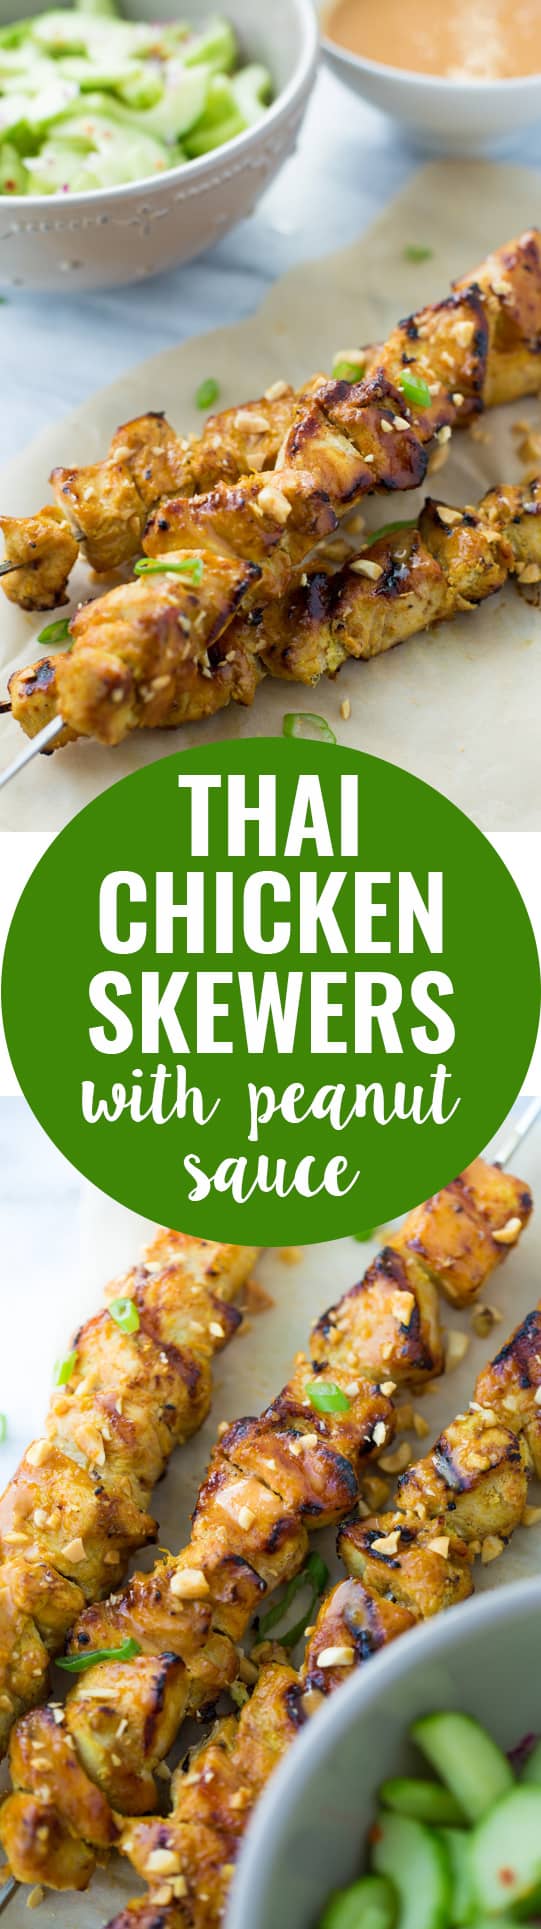 Thai Chicken Skewers with Peanut Sauce! Flavorful, easy and perfect for summer grilling! (Gluten-Free)